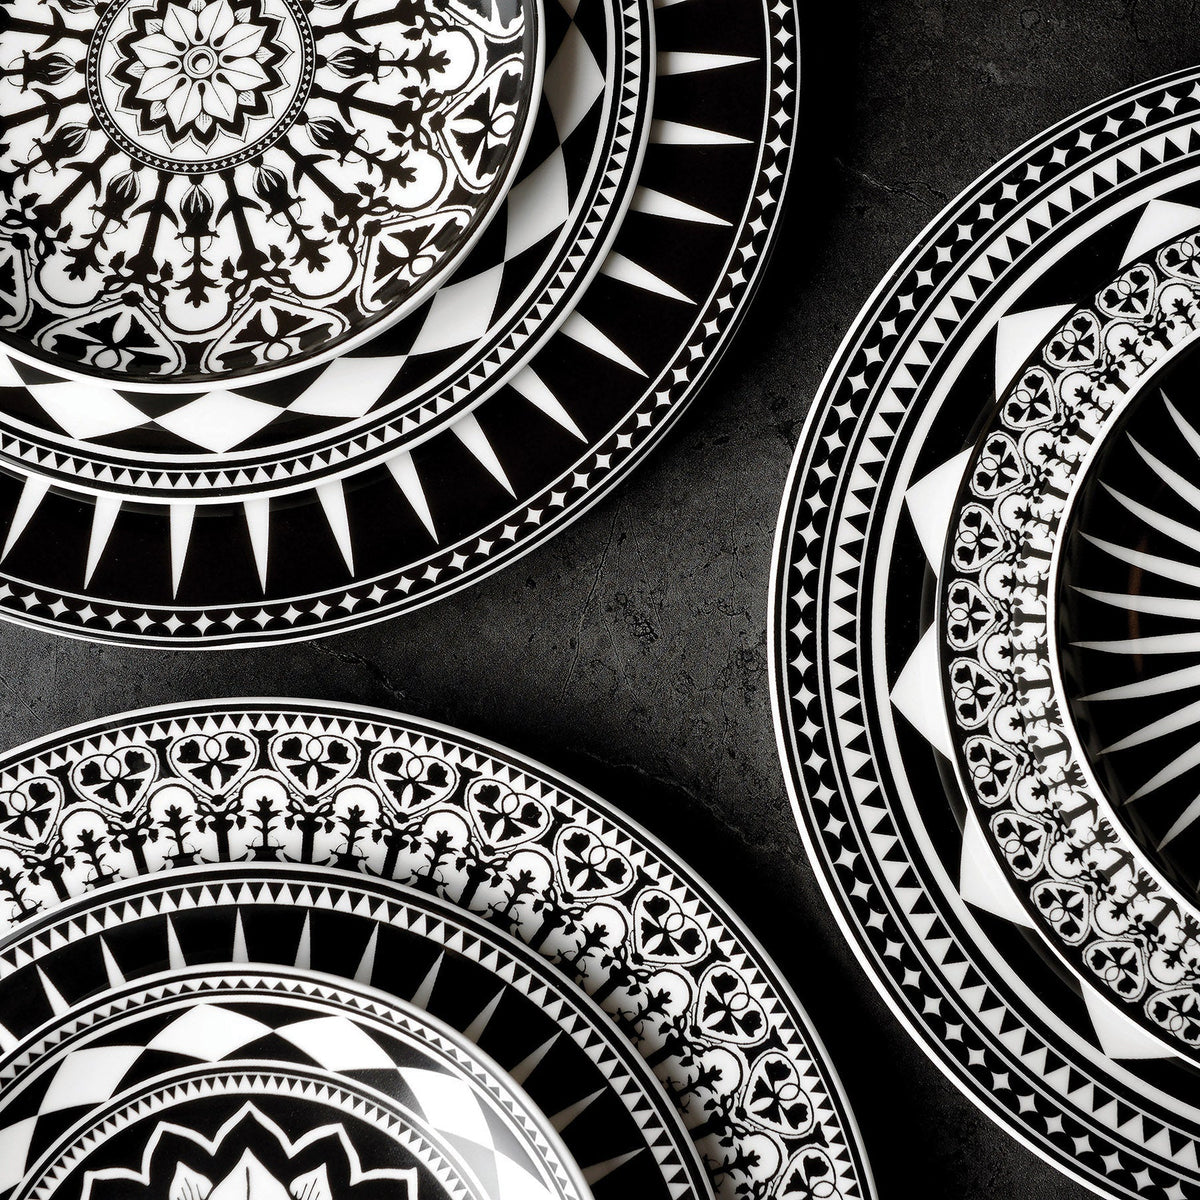 Close-up of four black and white decorative plates with intricate geometric and floral patterns arranged on a dark surface, exemplifying the elegance of Casablanca Rimmed Salad Plate made by Caskata Artisanal Home from lead-free porcelain.